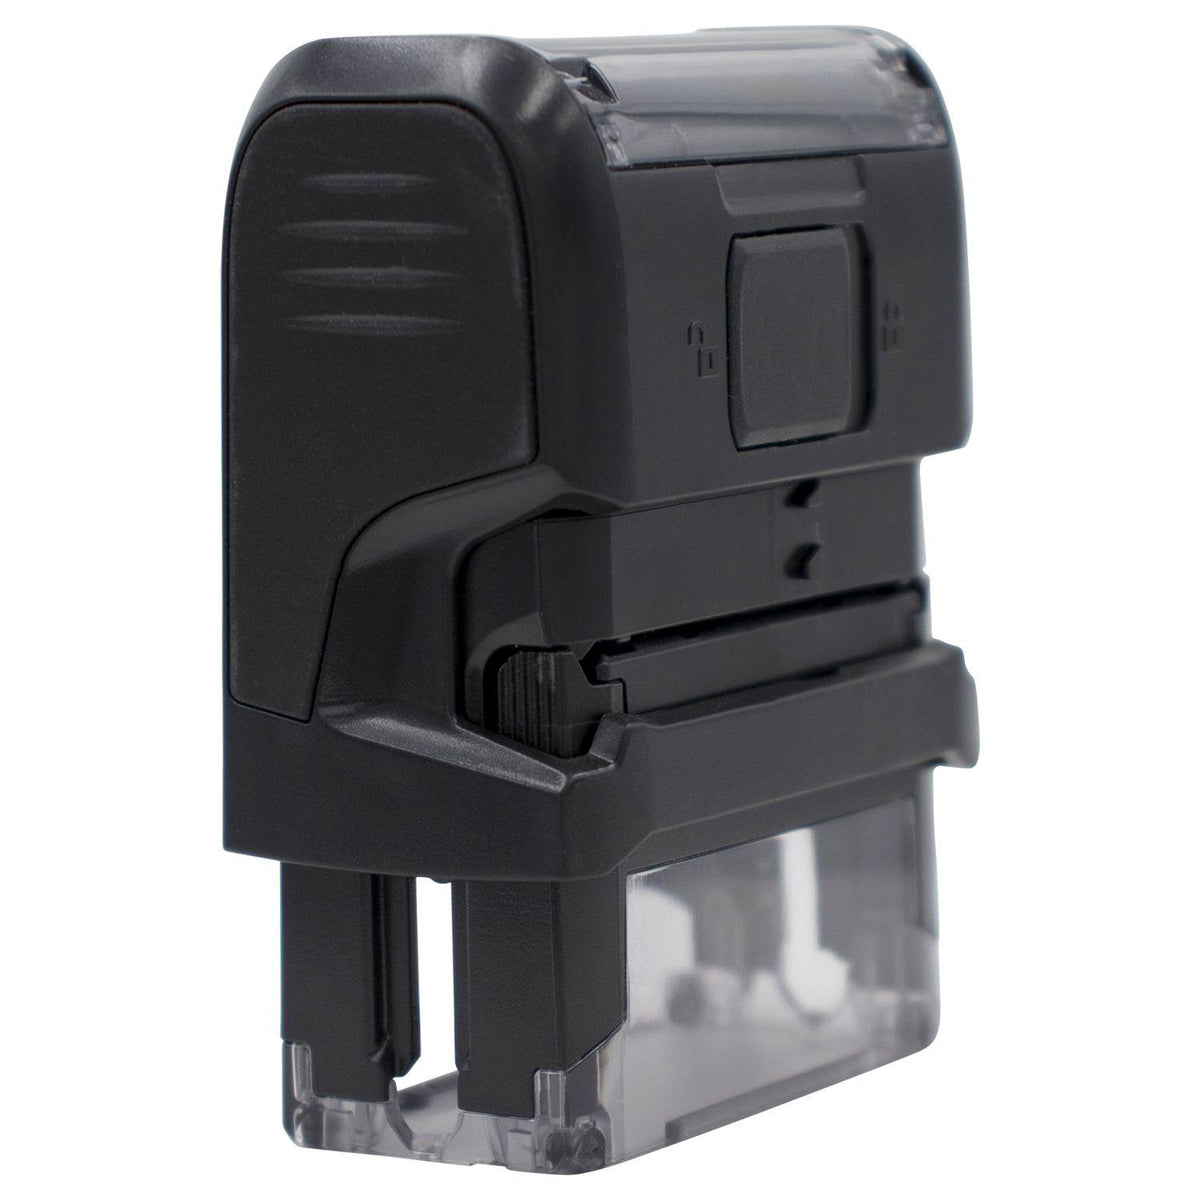 Self Inking Distributed Stamp With A Line - Engineer Seal Stamps - Brand_Trodat, Impression Size_Small, Stamp Type_Self-Inking Stamp, Type of Use_Business